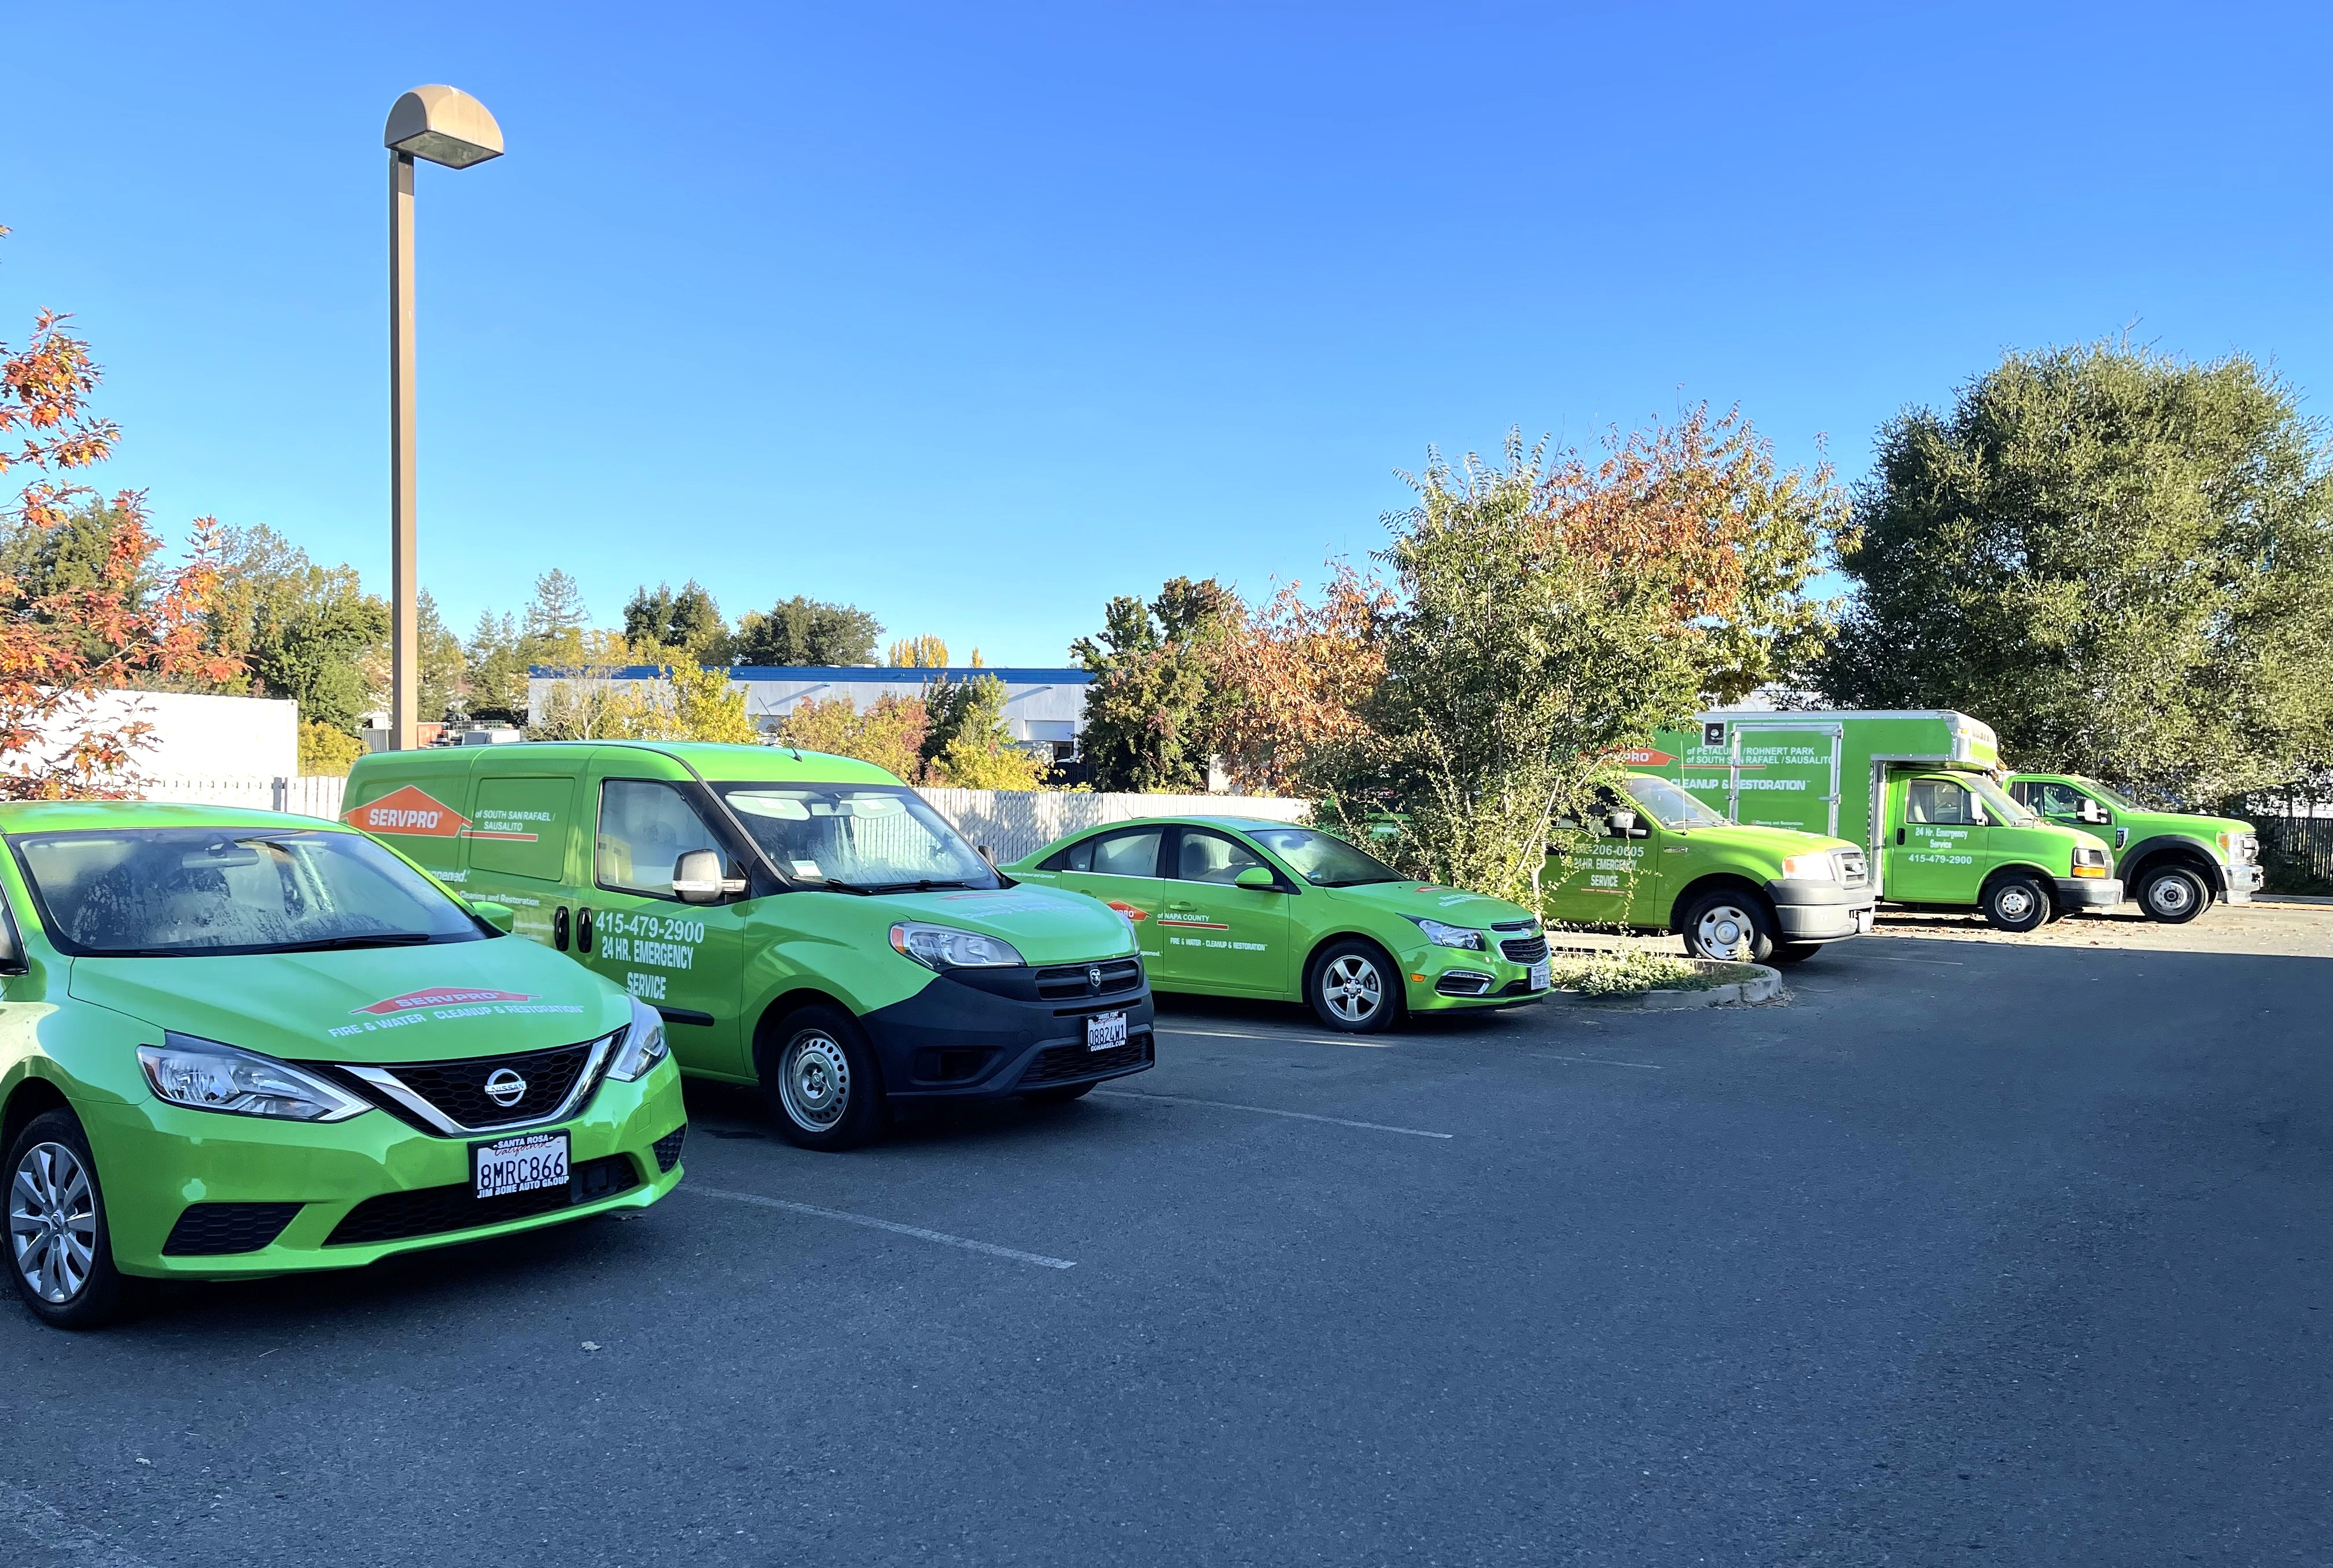 This photo includes six SERVPRO vehicles. This contains two vans, two trucks  and two sedans. All   SERVPRO's vehicles painted green and   have an orange official logo on each side of the vehicles. The vehicles are in the parking lot of 373 Blodgett Street and are parked facing the front entrance of the office building's services.